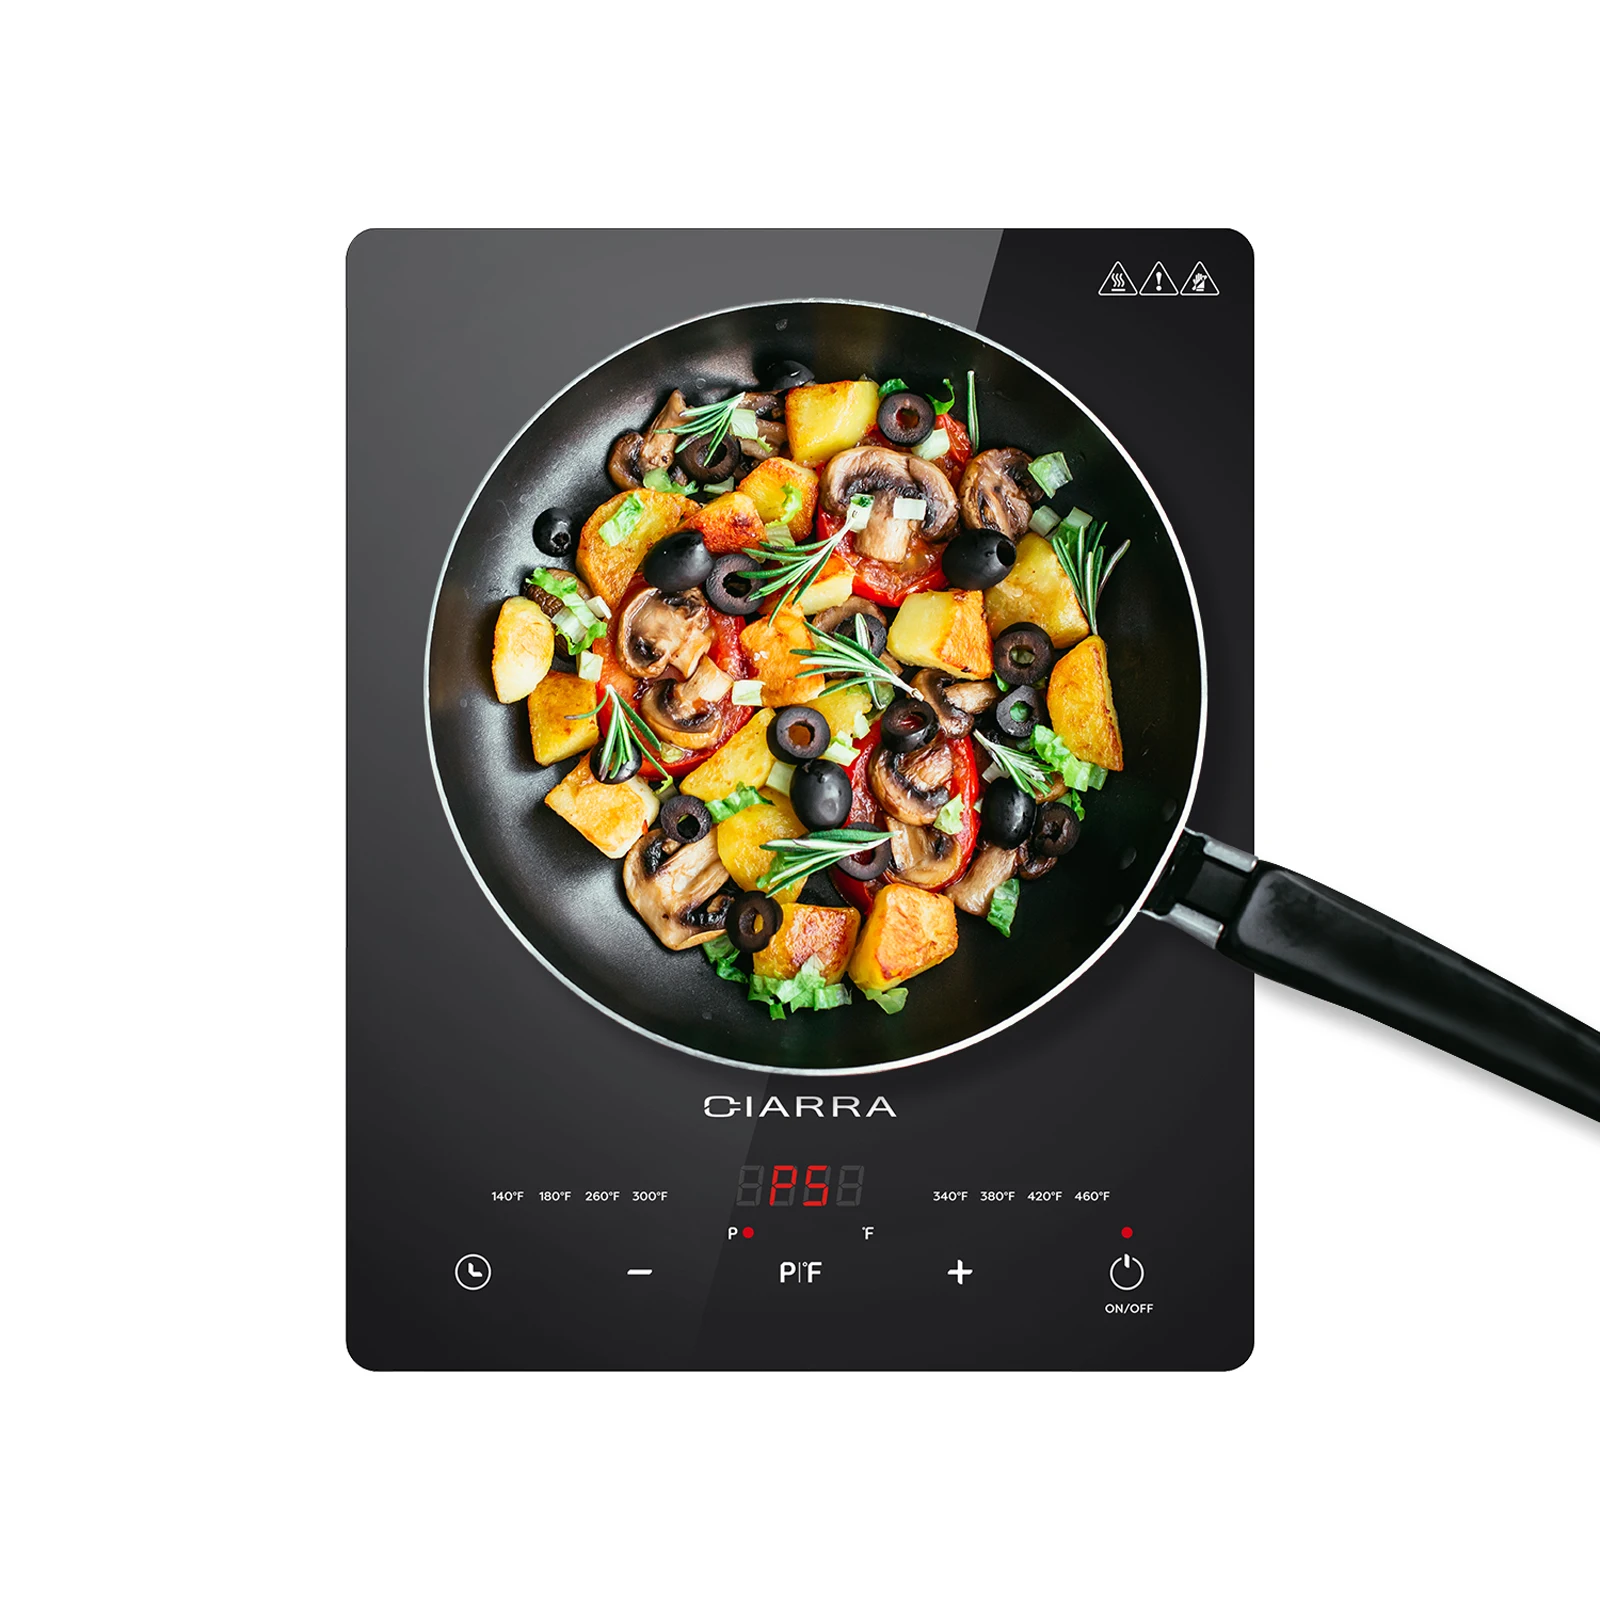 CIARRA CATIH1 1800W Portable Induction Cooktop, Ultra Slim Single Electric Countertop Burner with Sensor Touch and